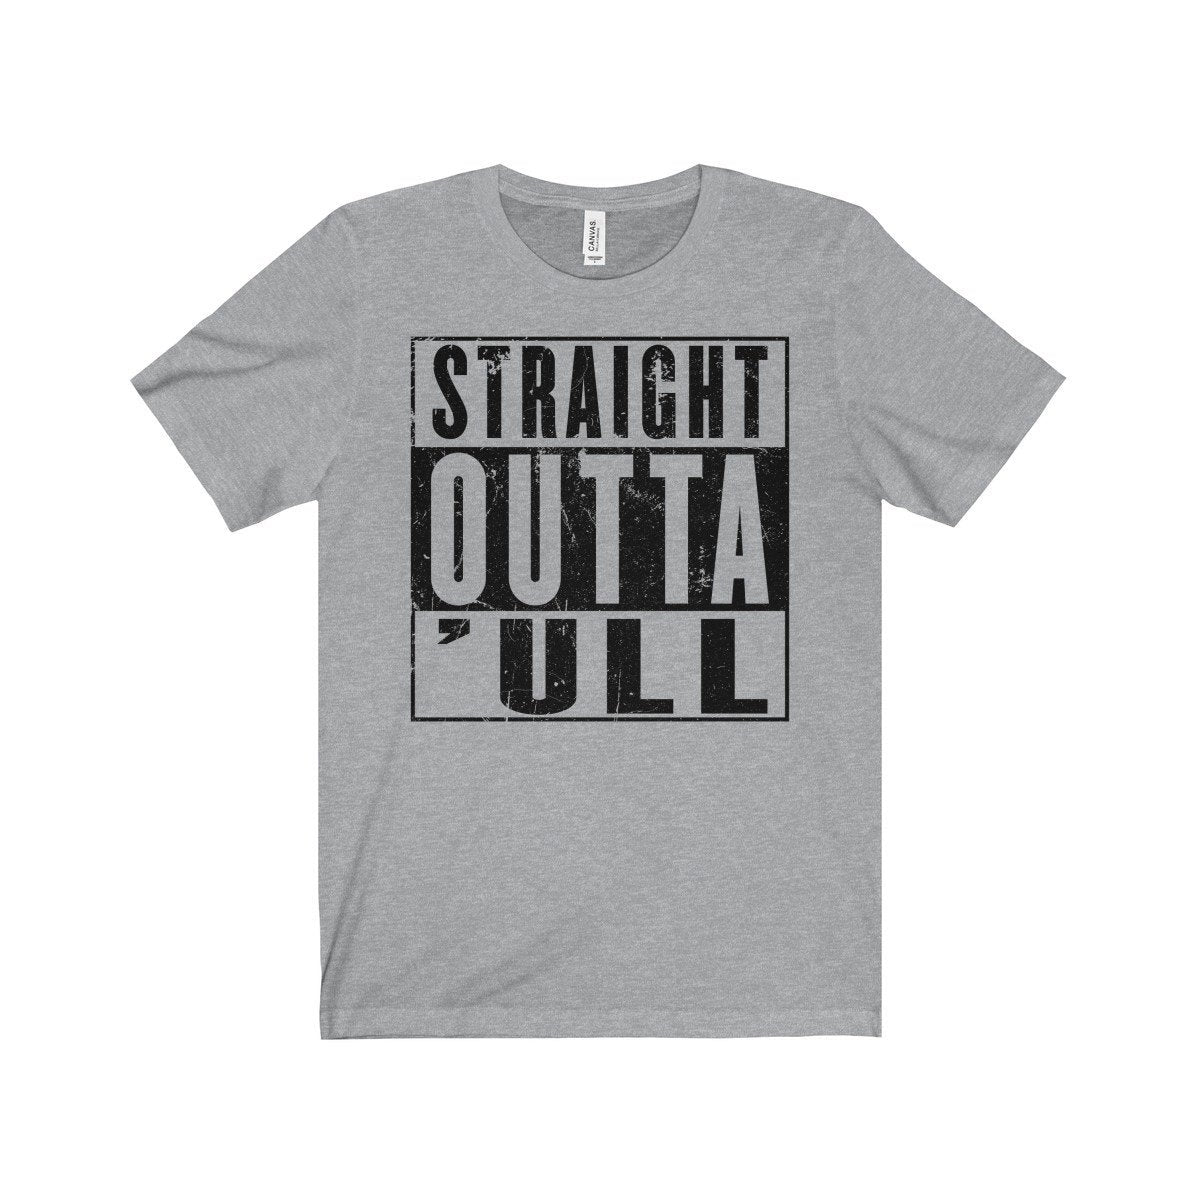 Straight Outta &#39;ull (Hull) Black Funny Compton NWA Style Unisex Jersey Short Sleeve Tee